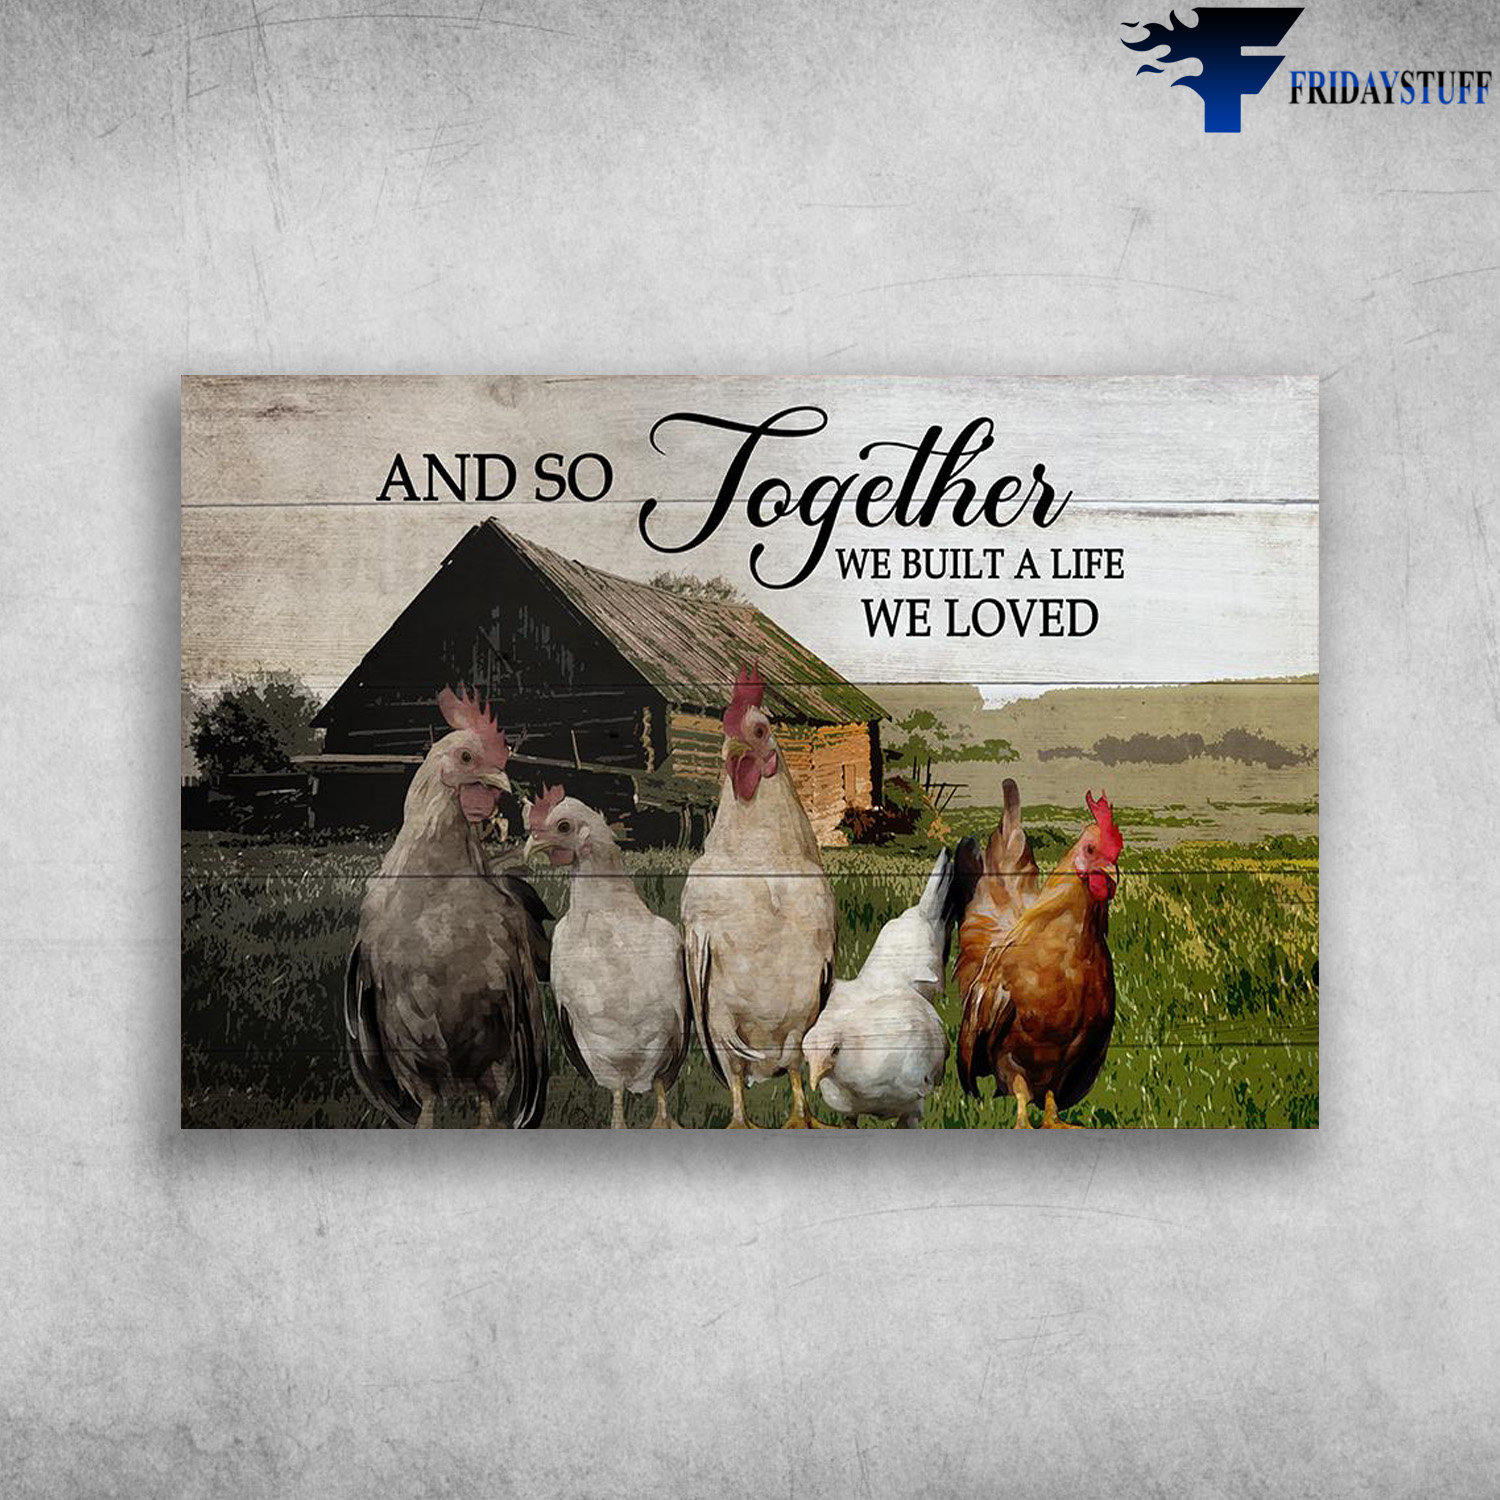 The Chickens On The Farm - And So Together, We Build A Life We Loved